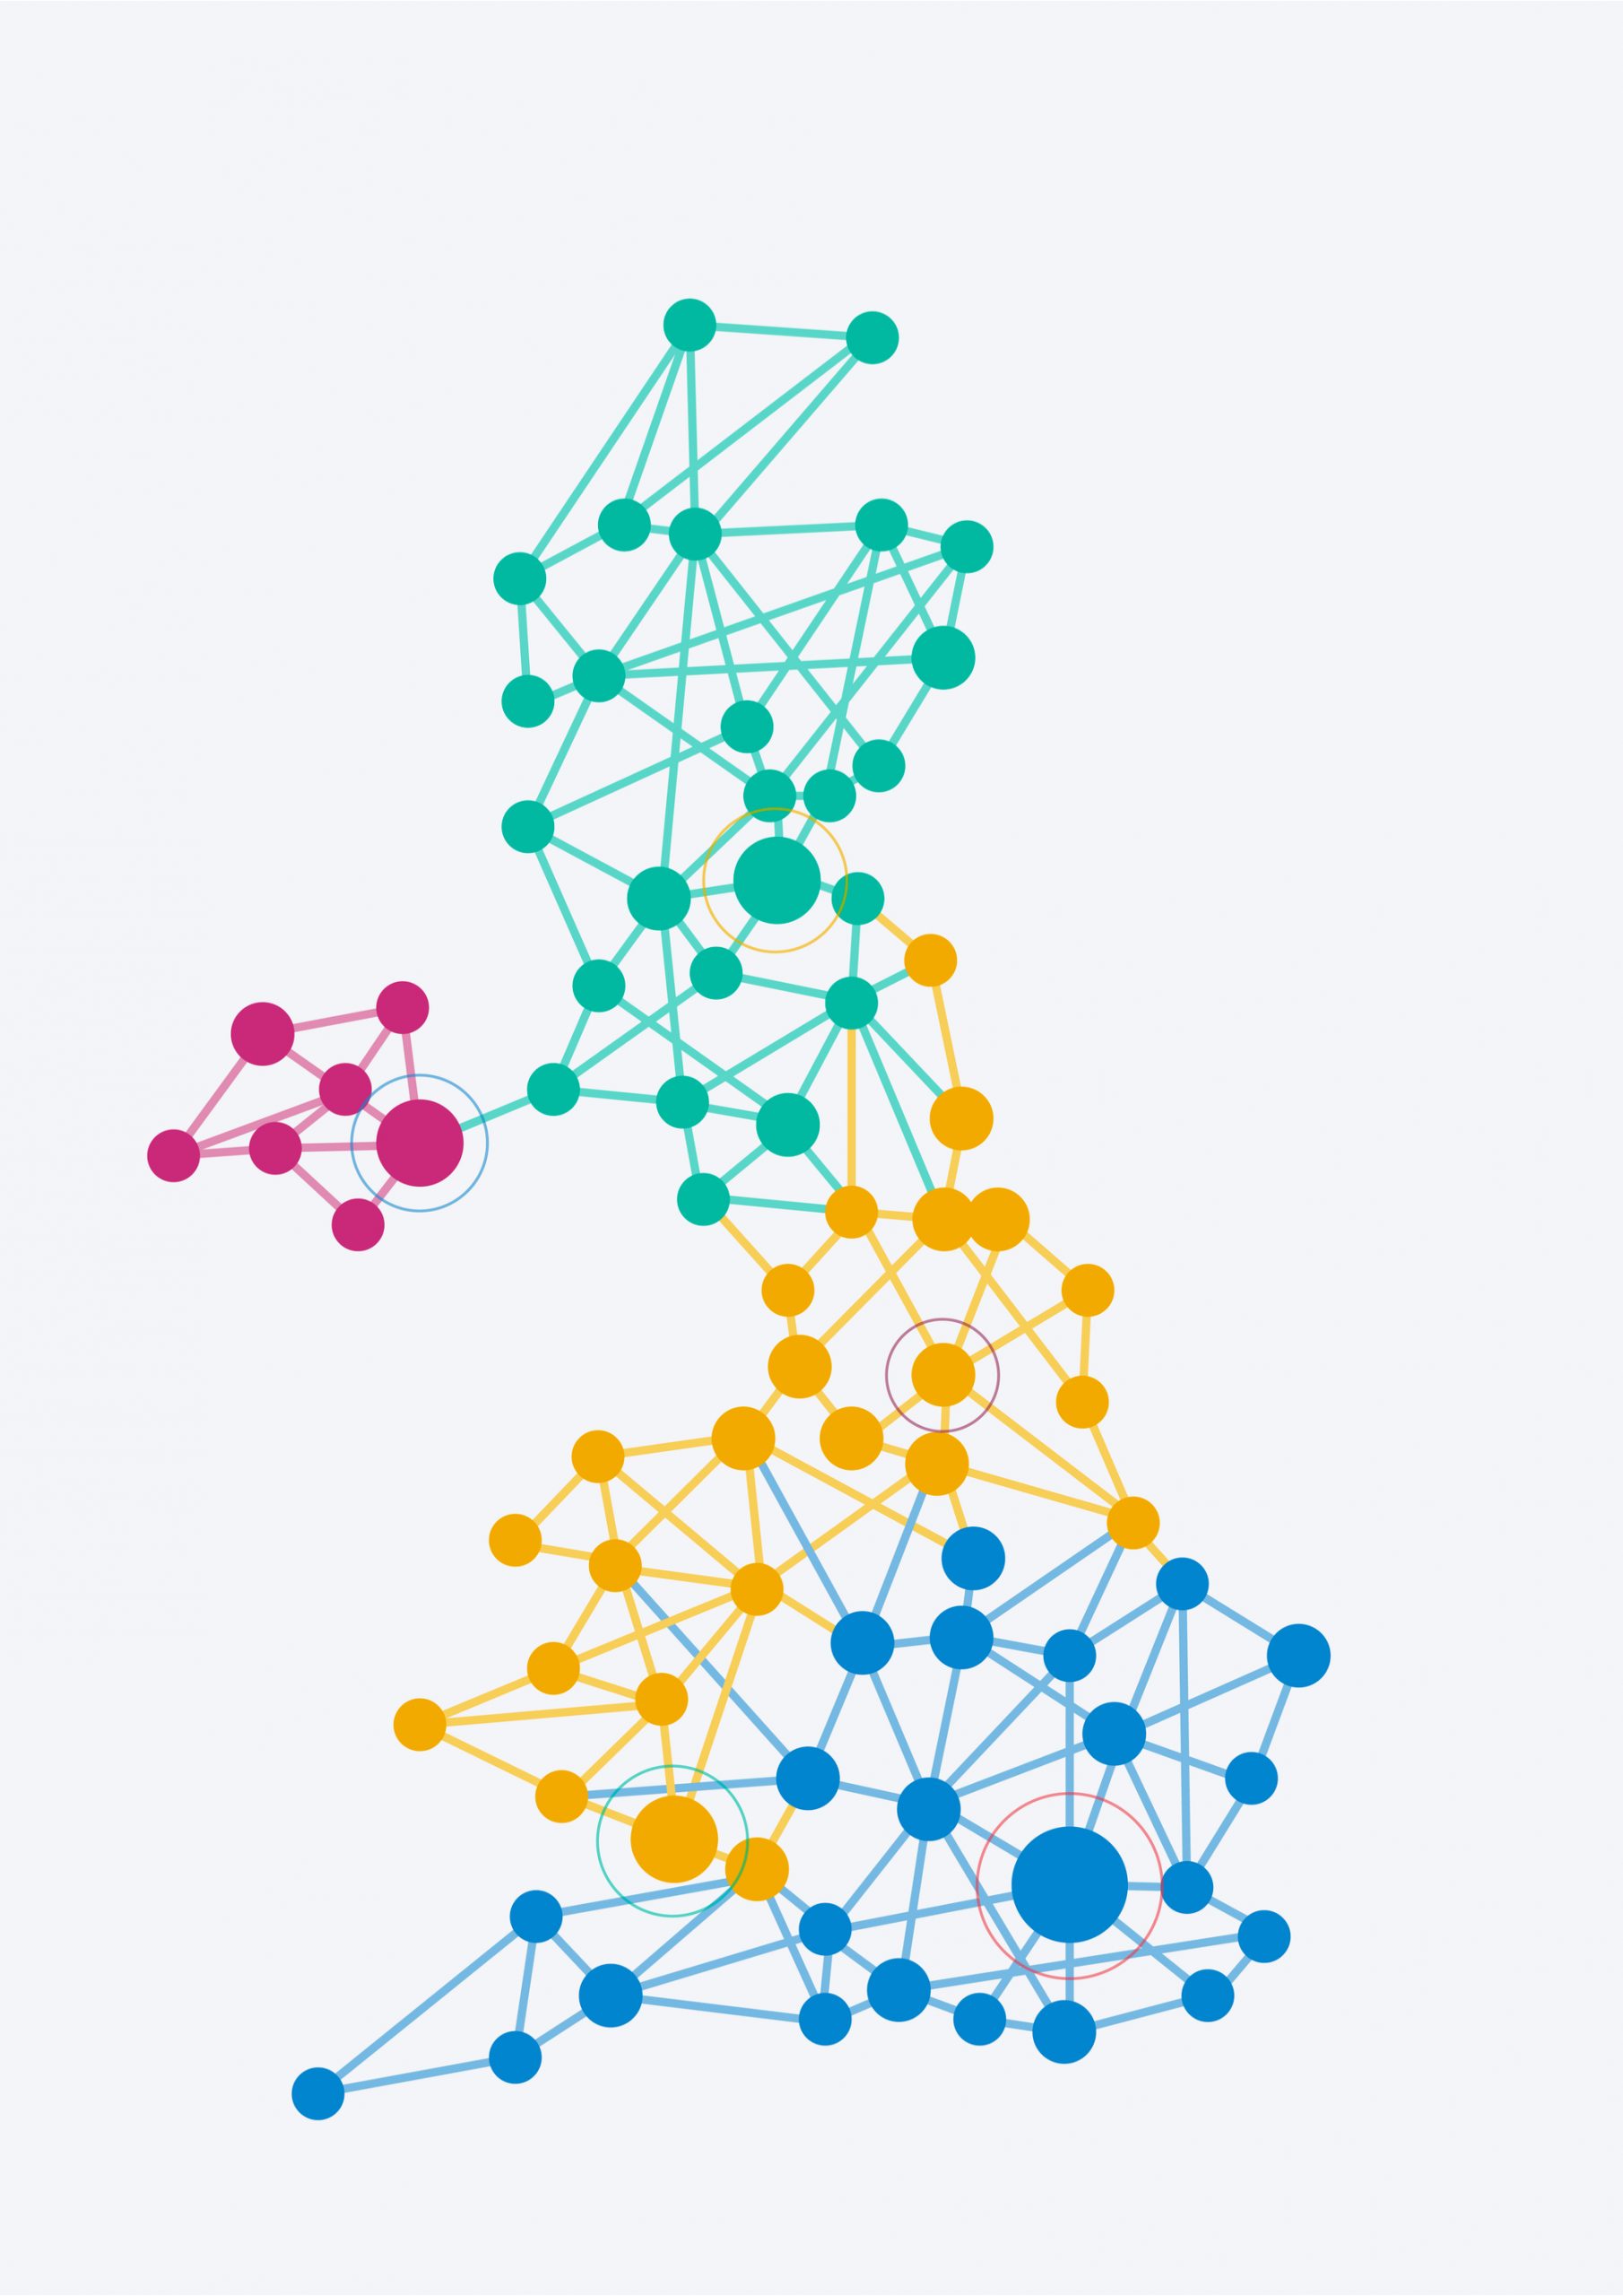 UK Data Connections